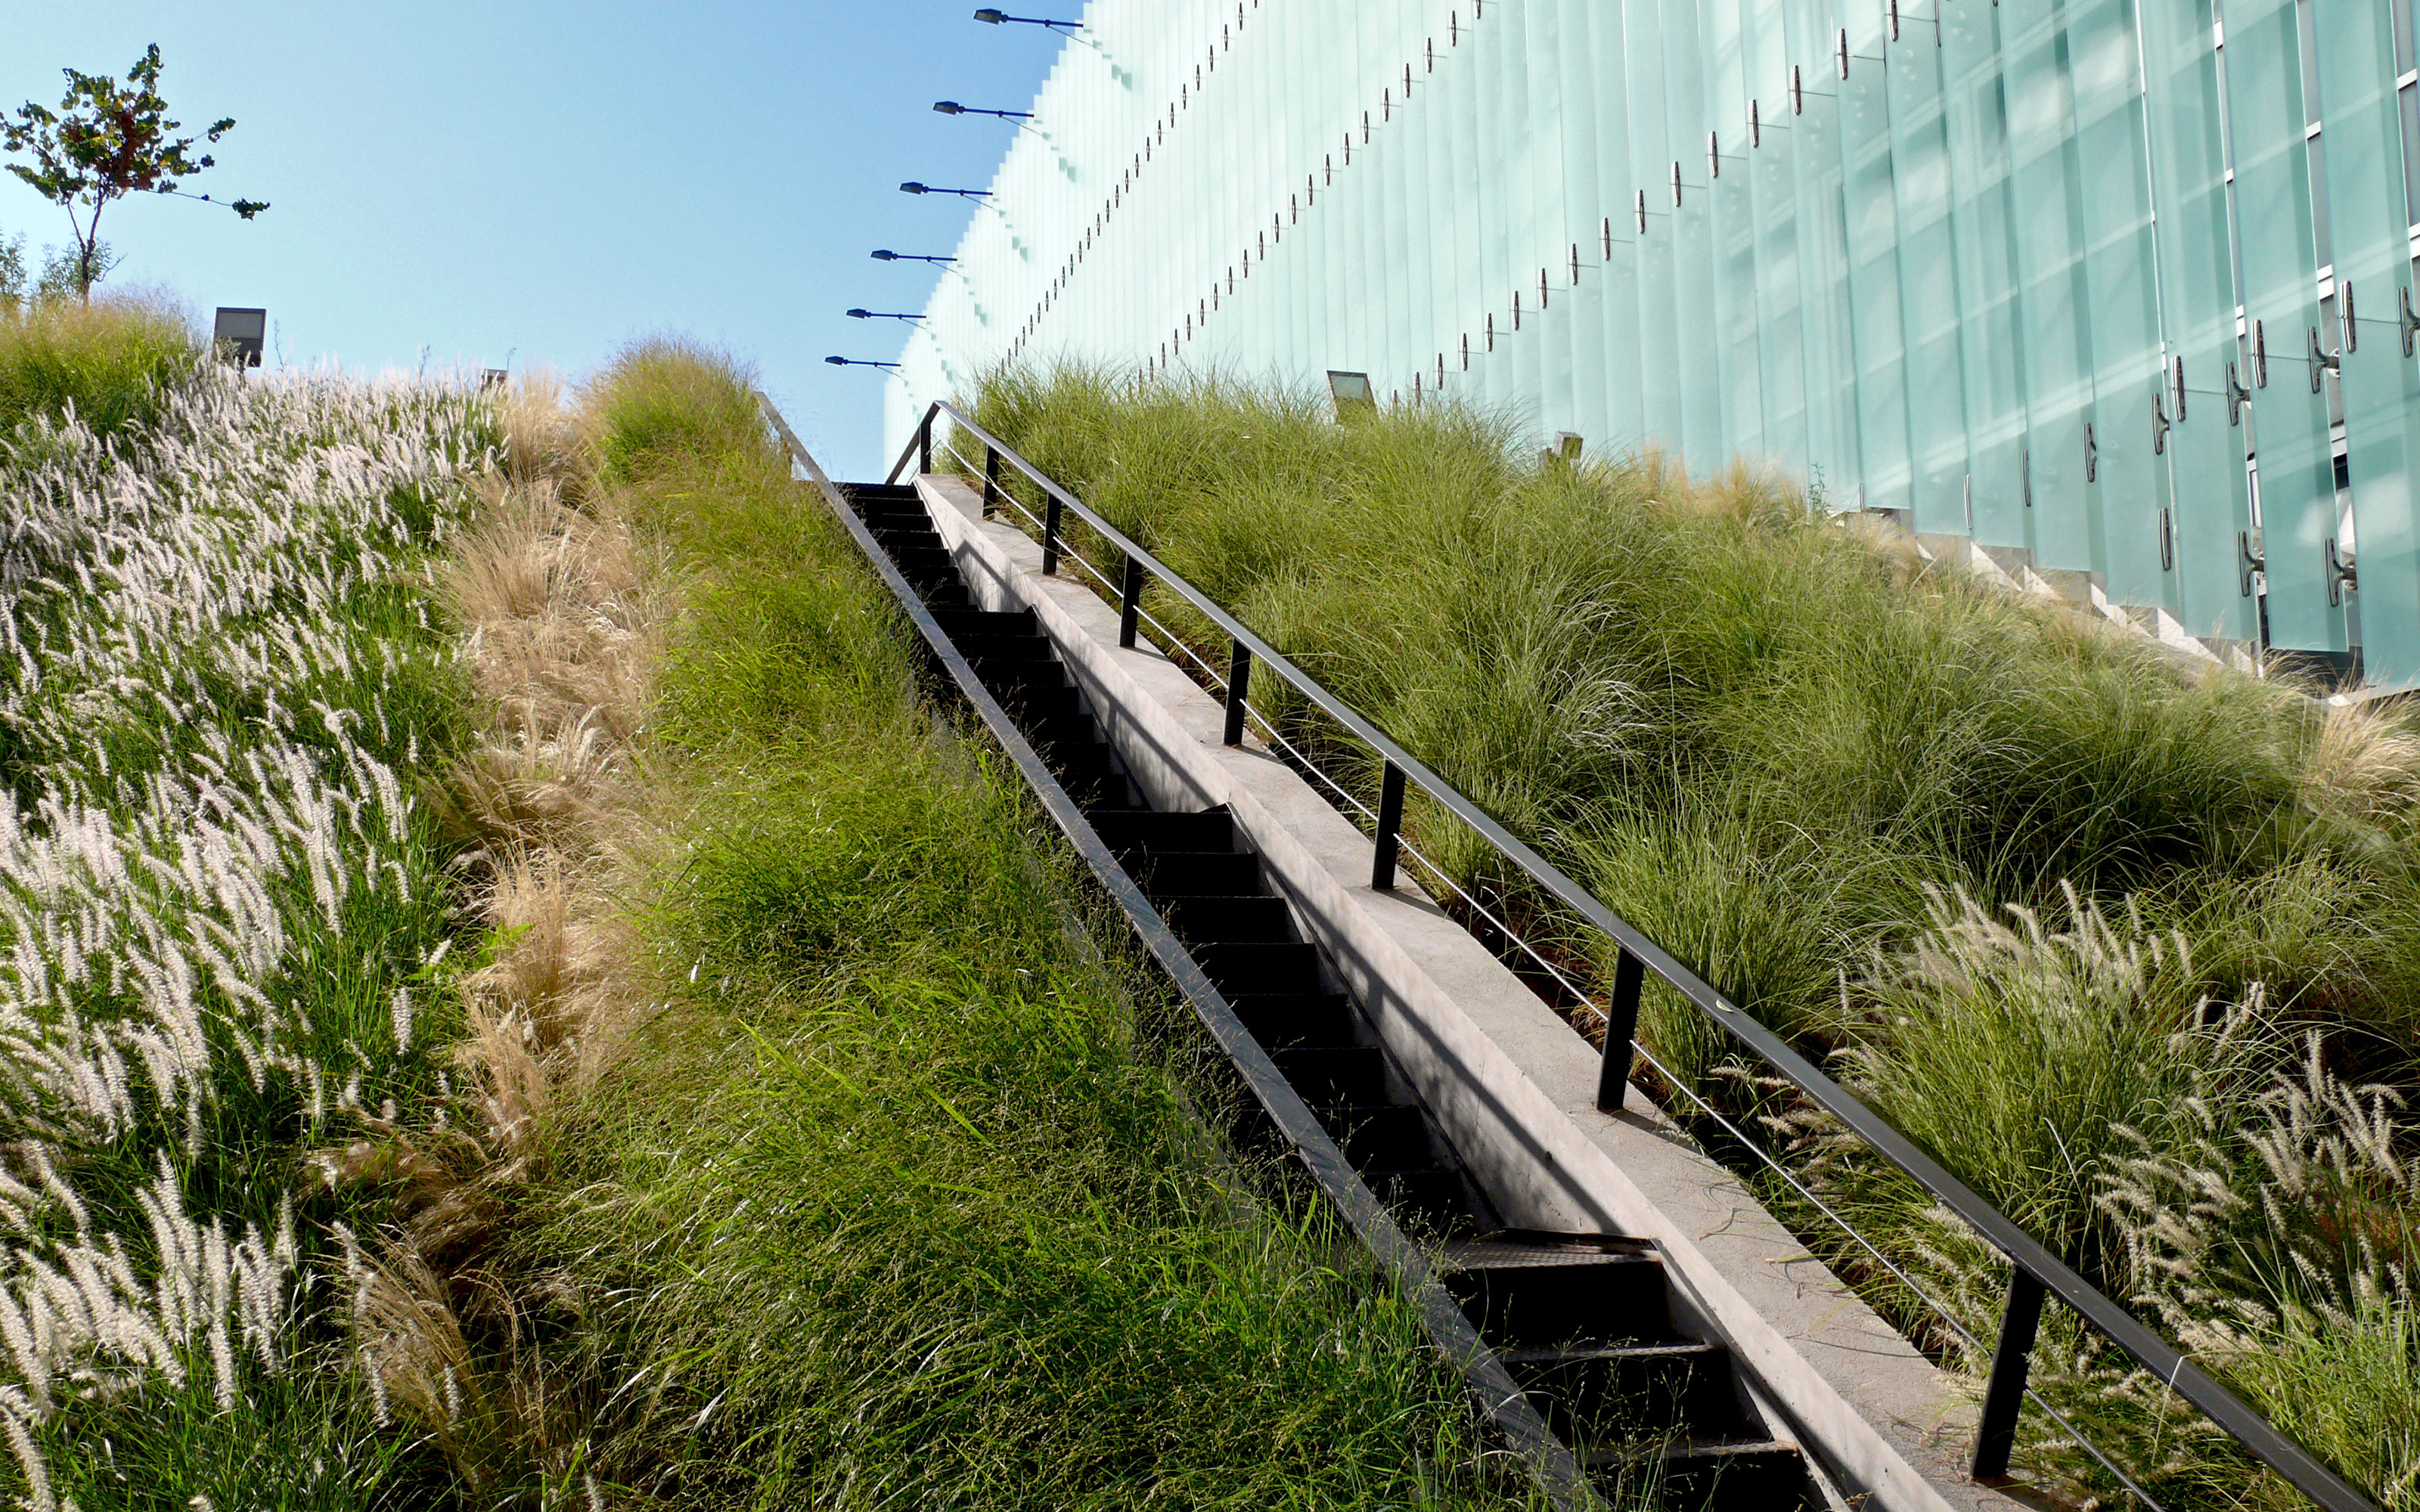 Pitched green roof with ornamental grasses and stairs up to the rooftop